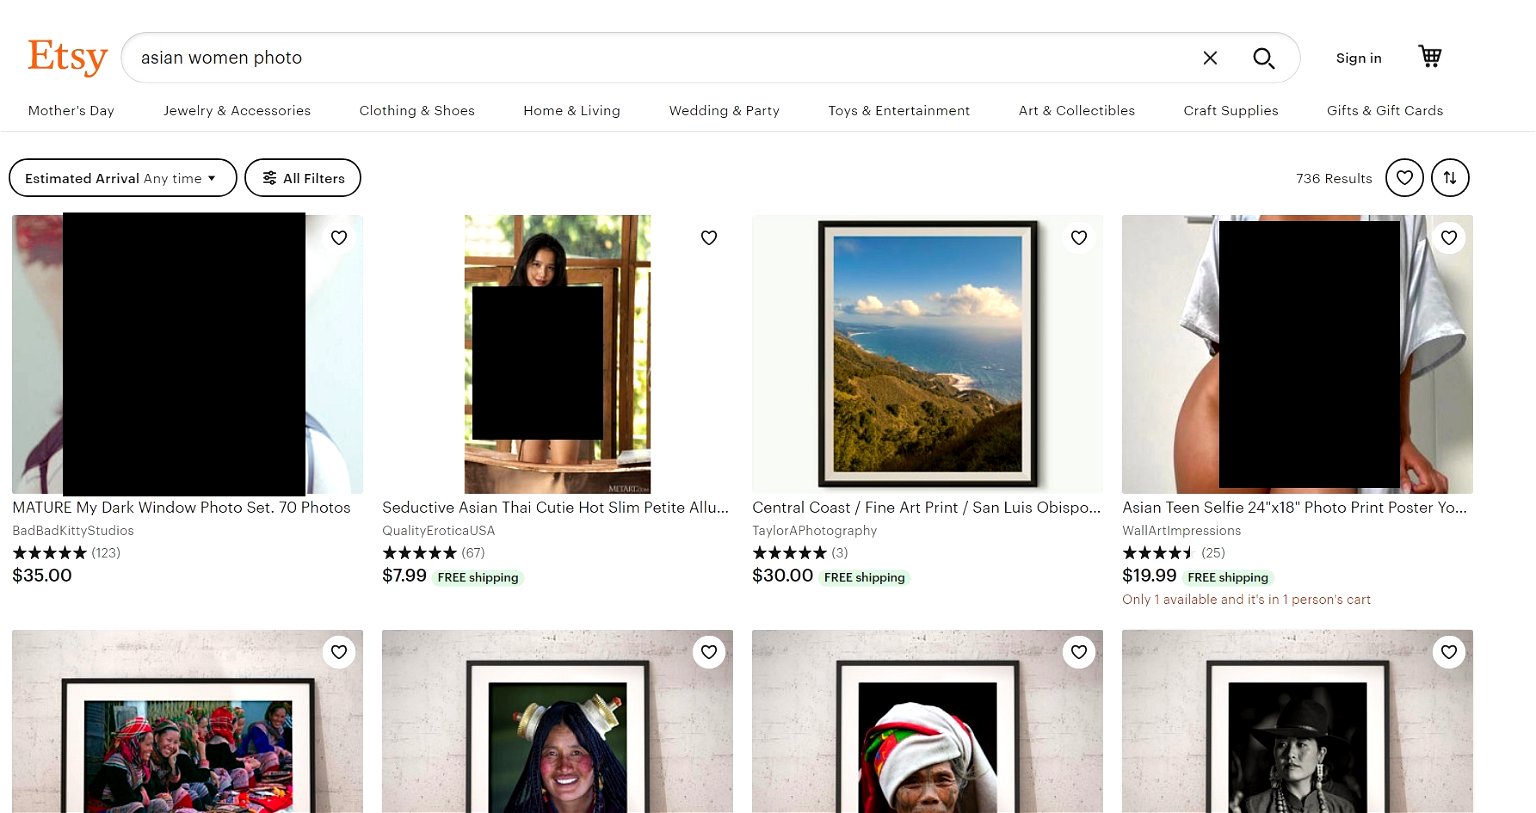 Etsy Search Results for ‘Asian Photo’ Show Erotic Photos of Asian Women